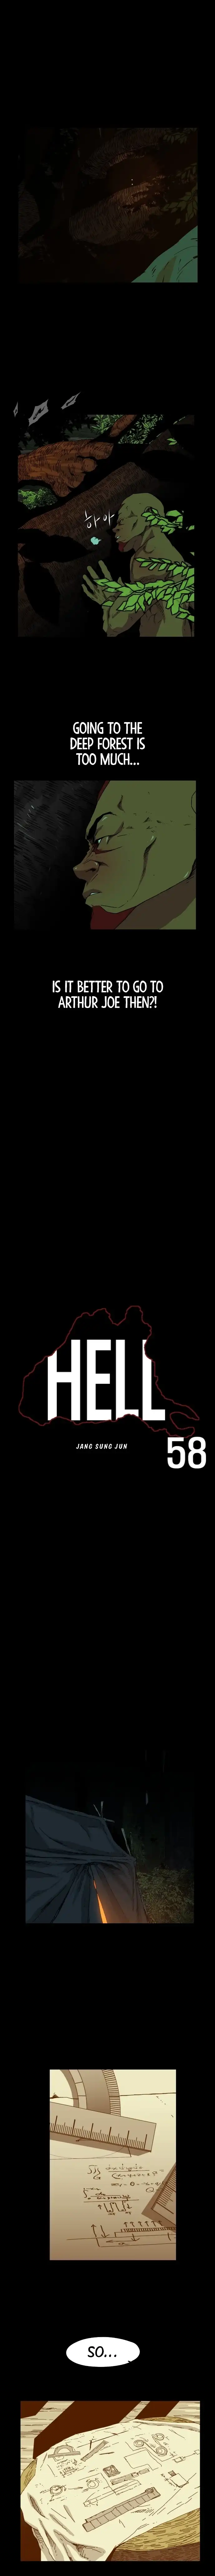 Hell 58 Chapter 45 - page 4